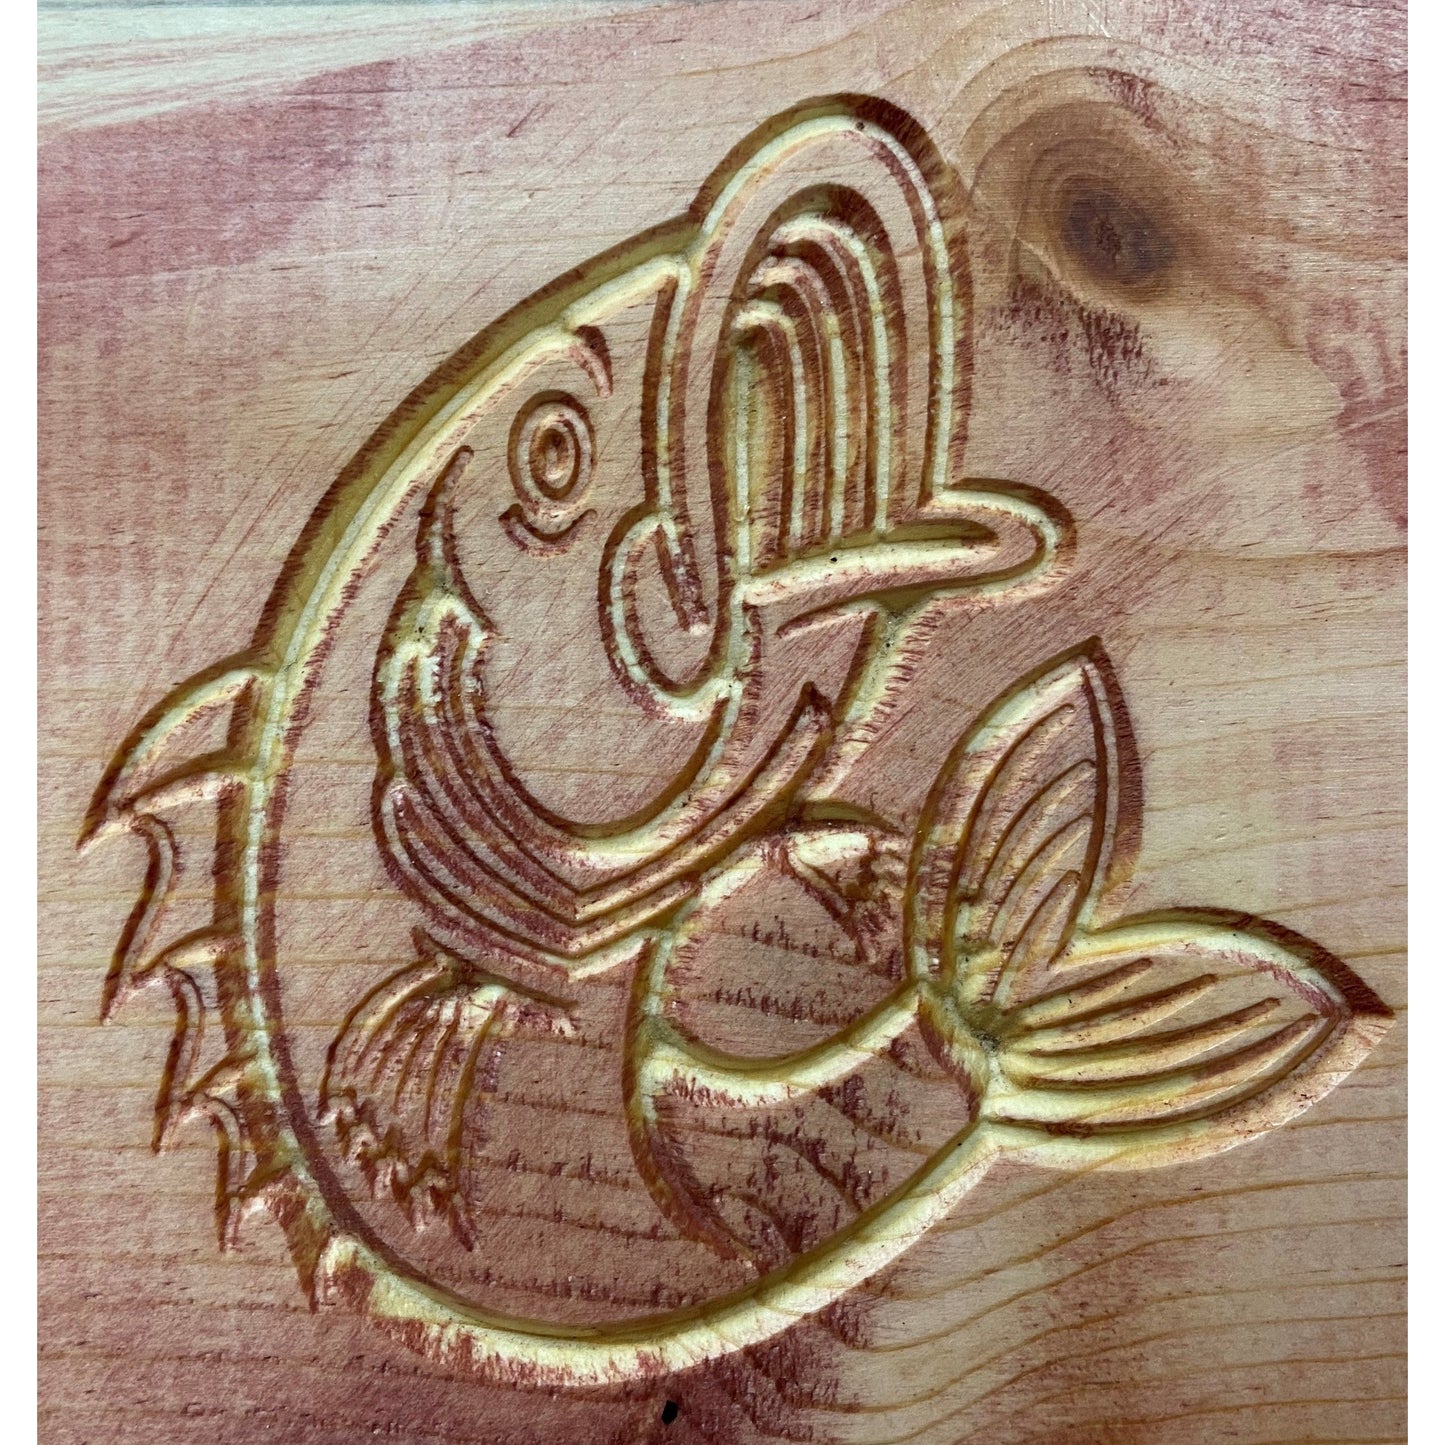 Underwater Ocean and Sea Fishes-DXF files Cut Ready CNC Designs-DXFforCNC.com